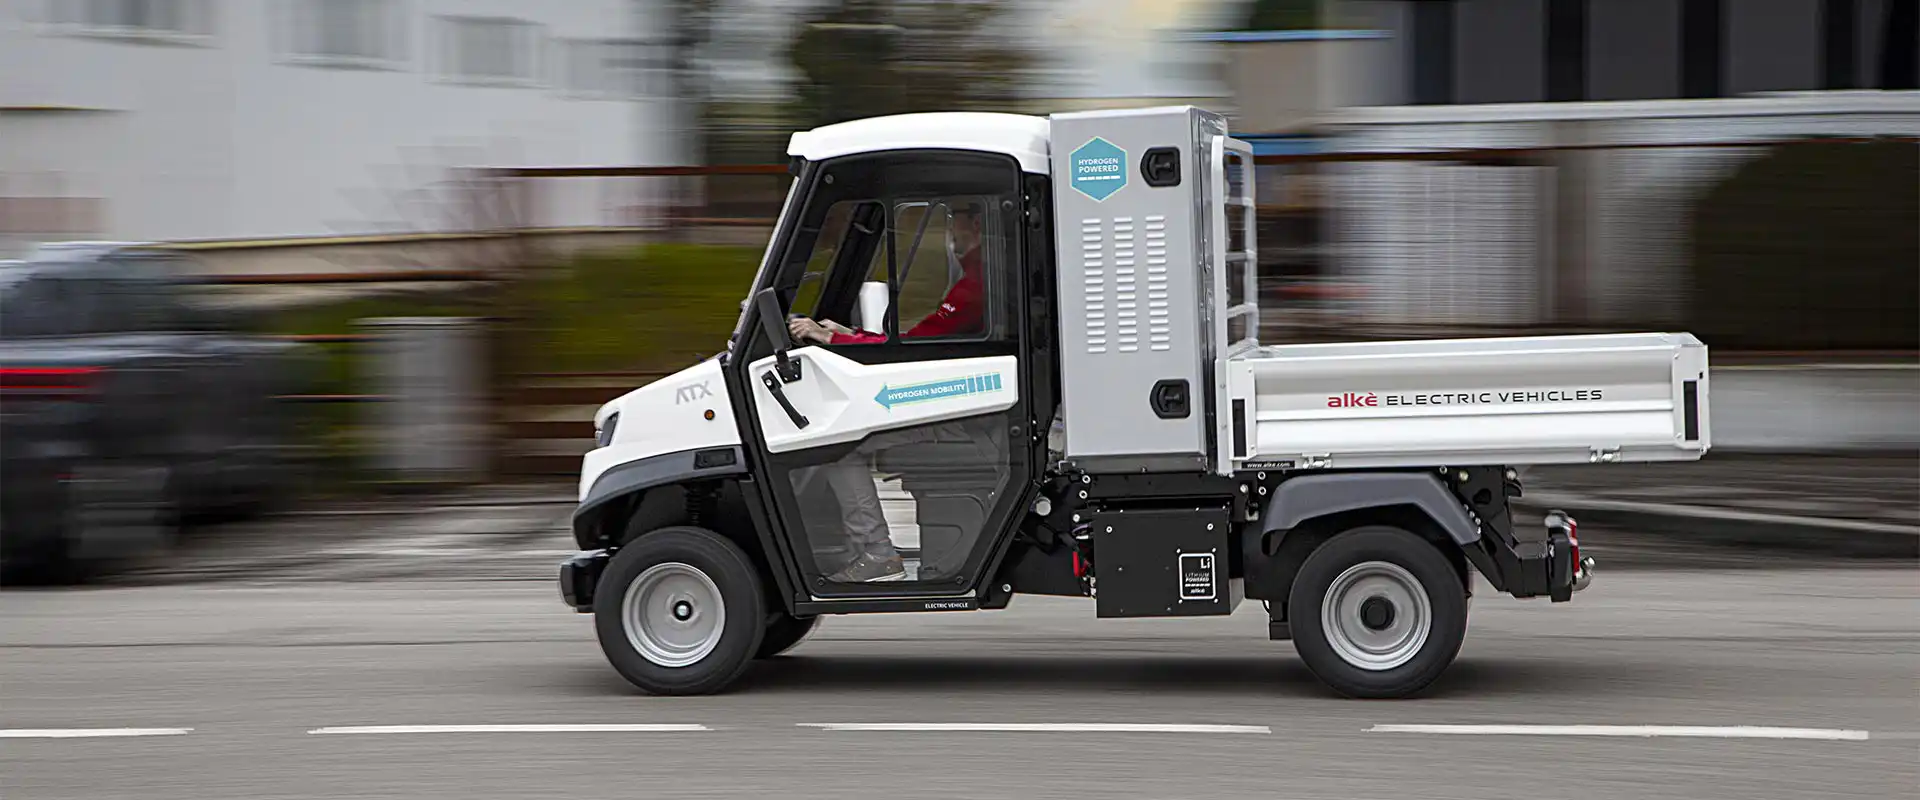 Hydrogen vehicles for urban transport and logistics